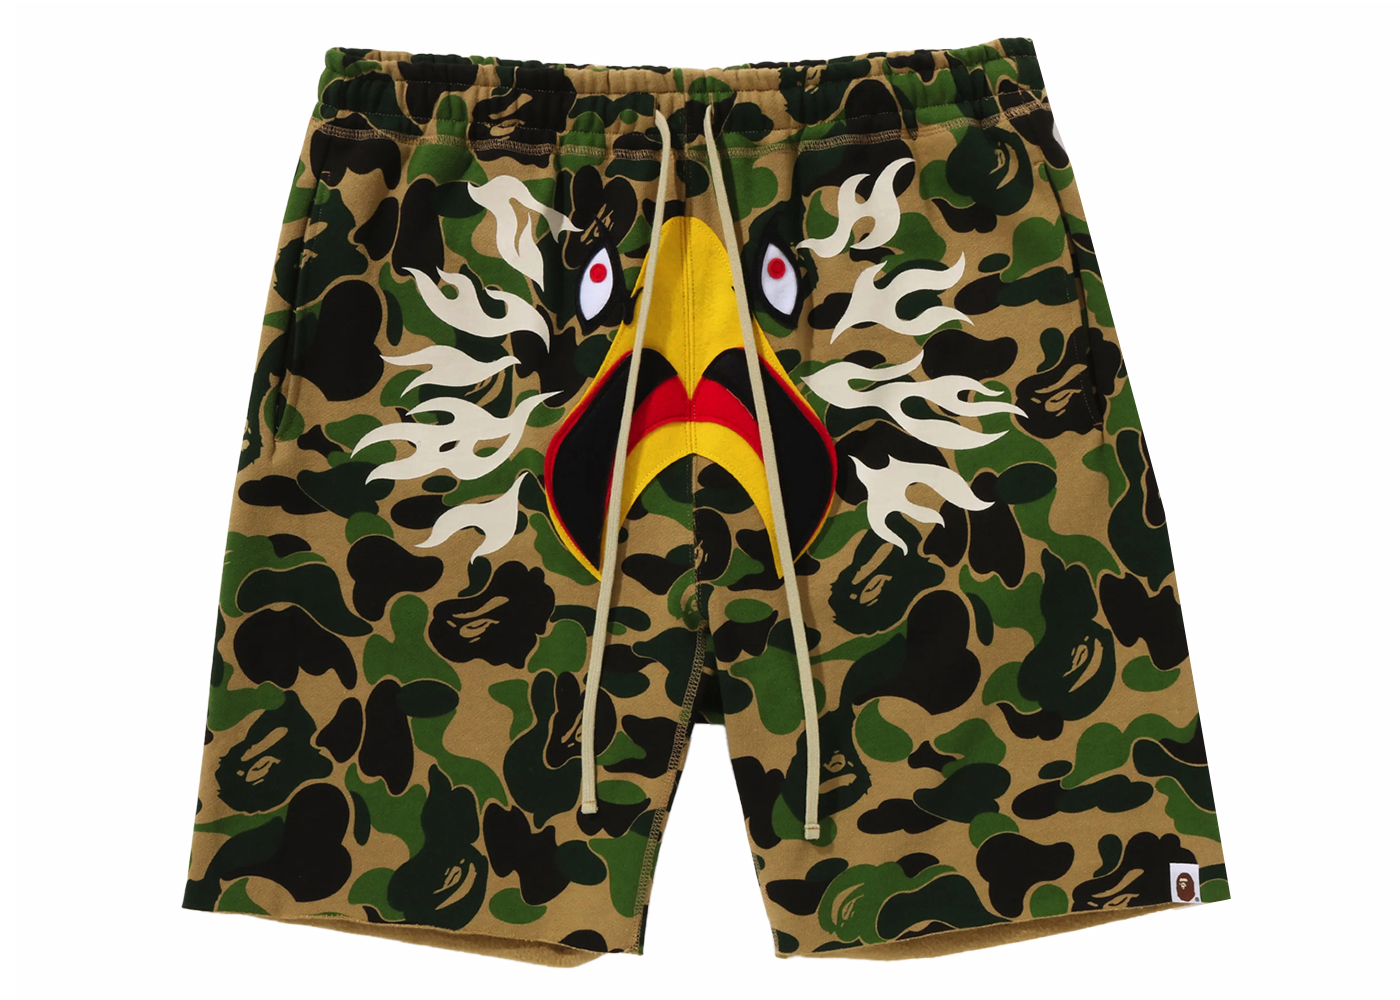 A BATHING APE x READYMADE Shorts Green | camillevieraservices.com